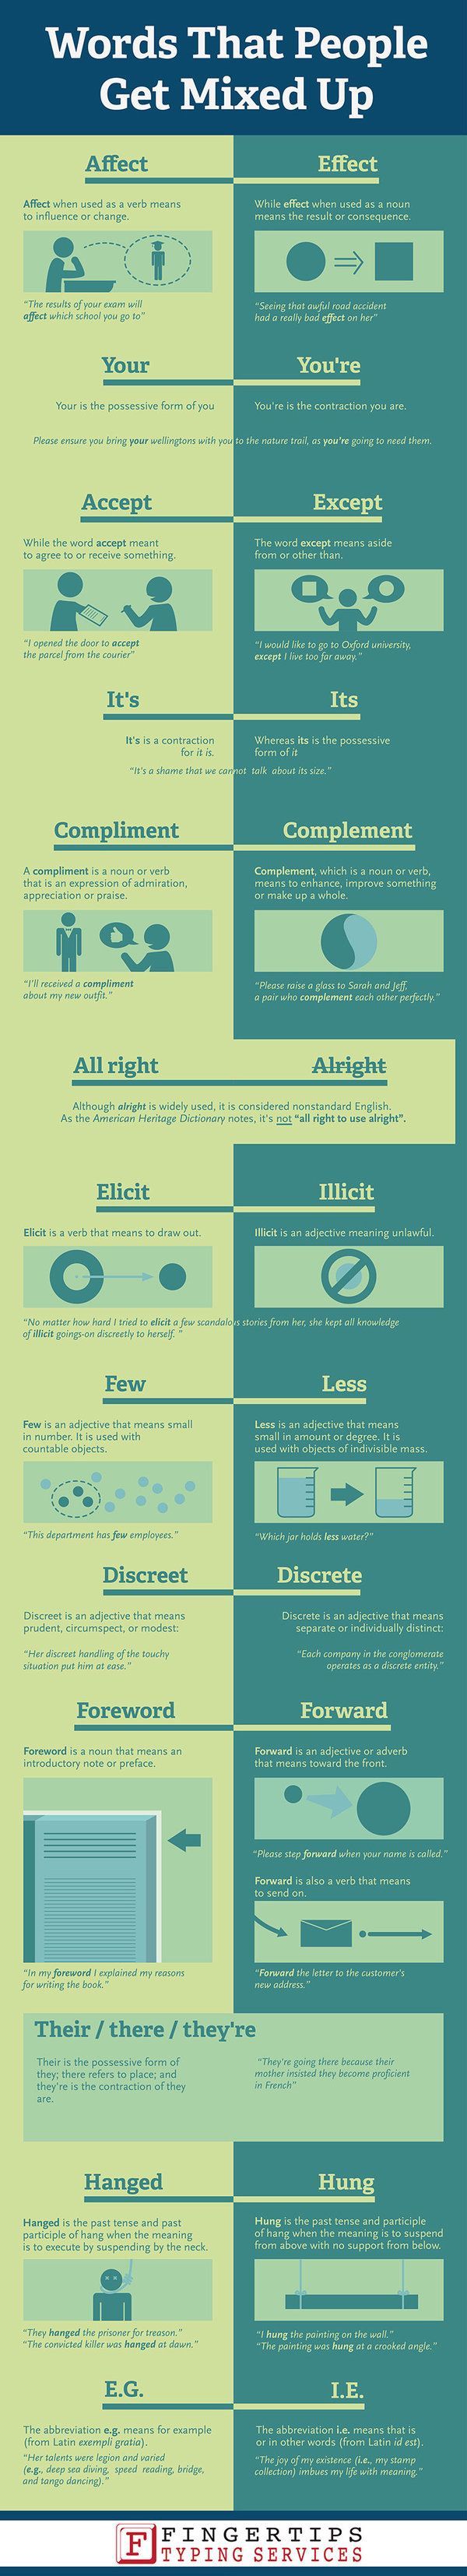 Top 13 Words That People Get Mixed Up (Infographic)